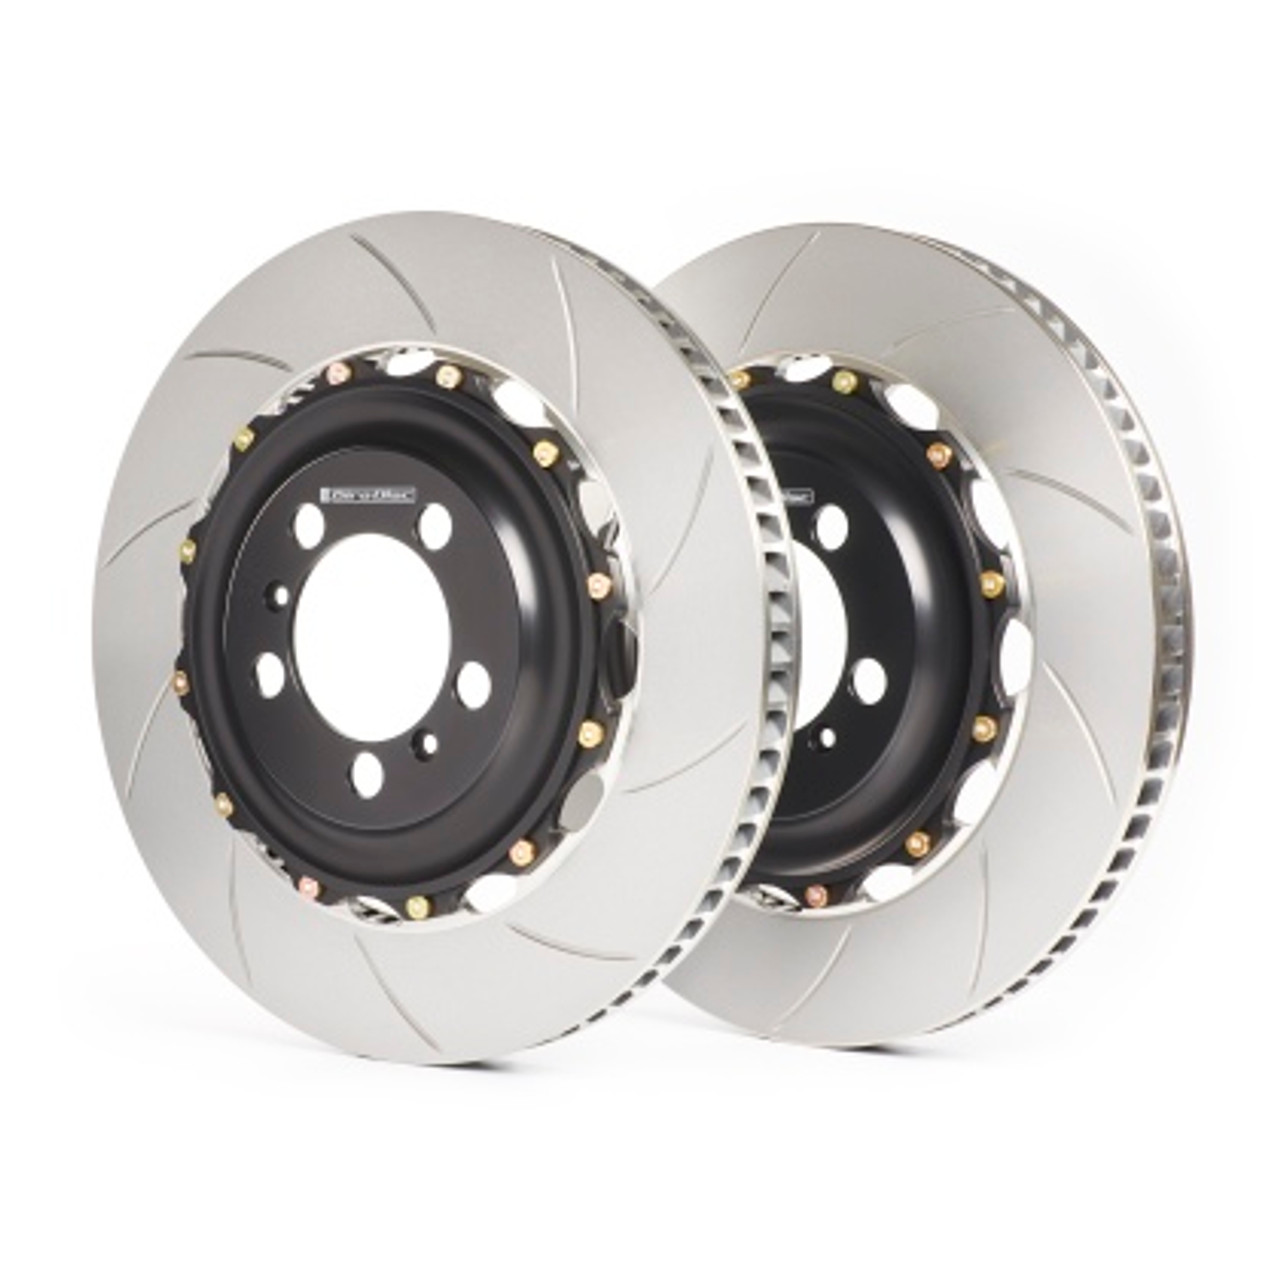 GiroDisc 2012+ Nissan GT+R (R35) DBA 390mm Slotted Front Rotors (Drilled for M2012/M2014 Lugs)